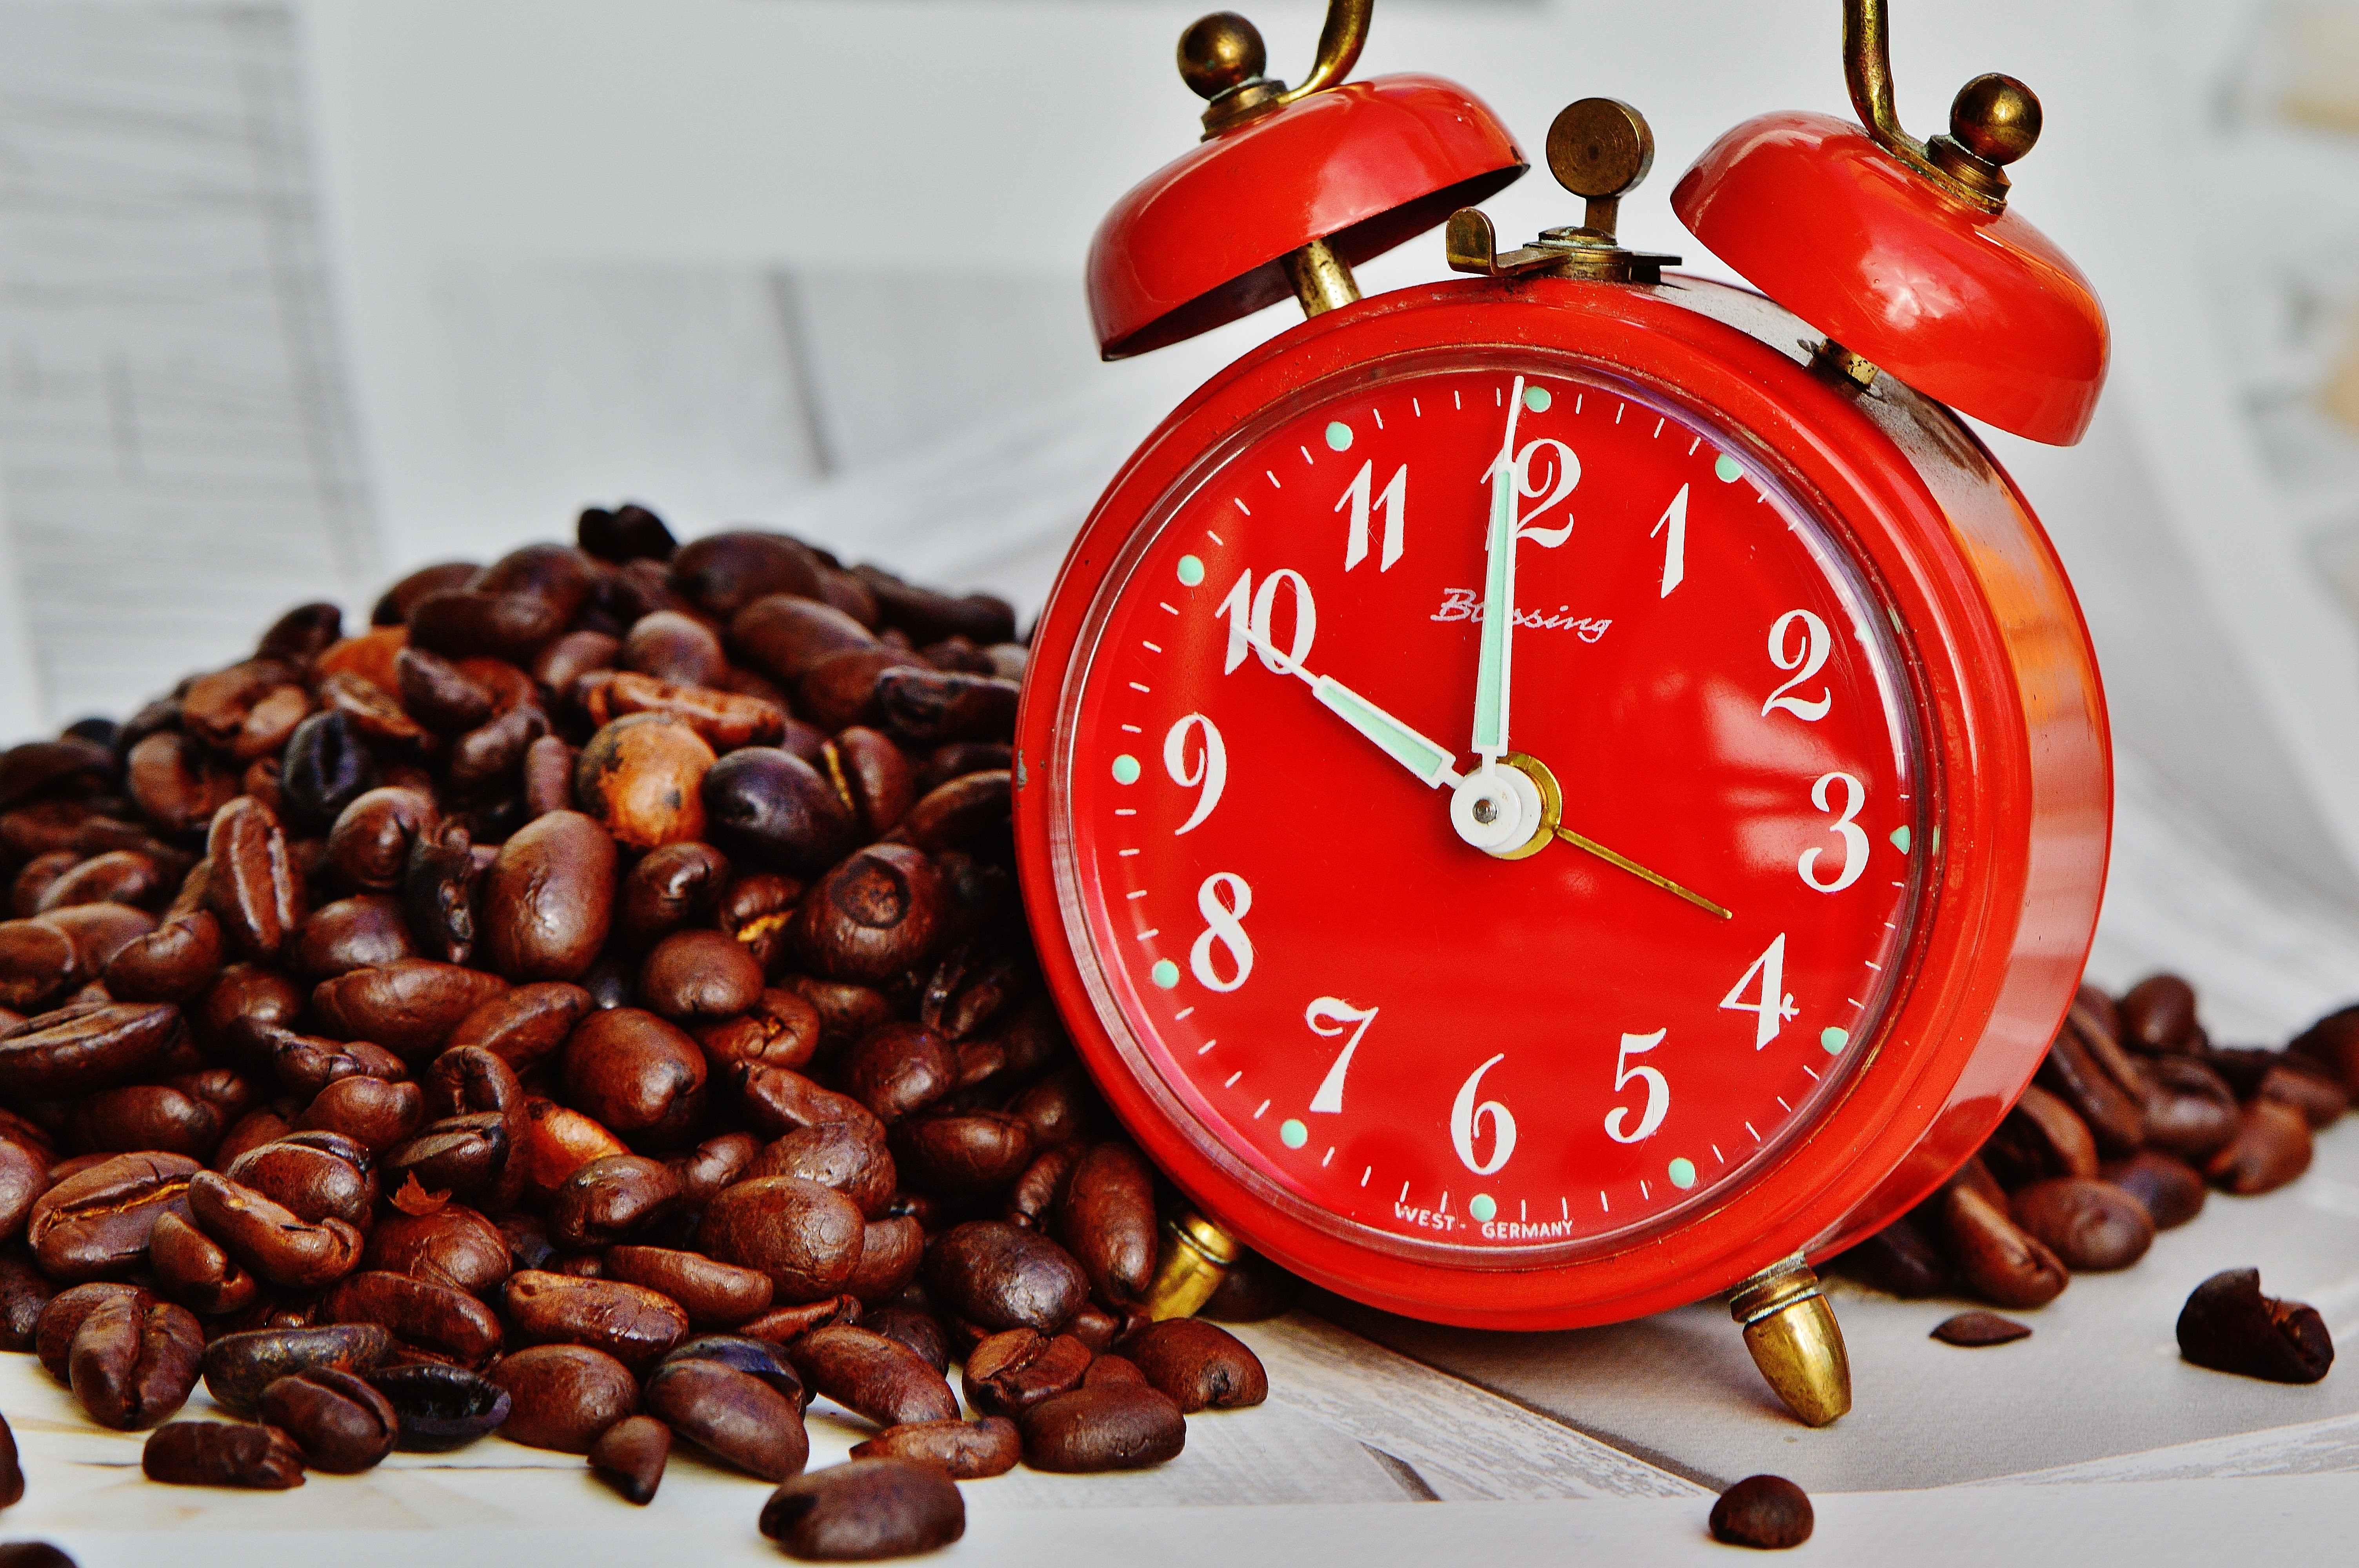 coffee bean lot and red and white analog alarm clock